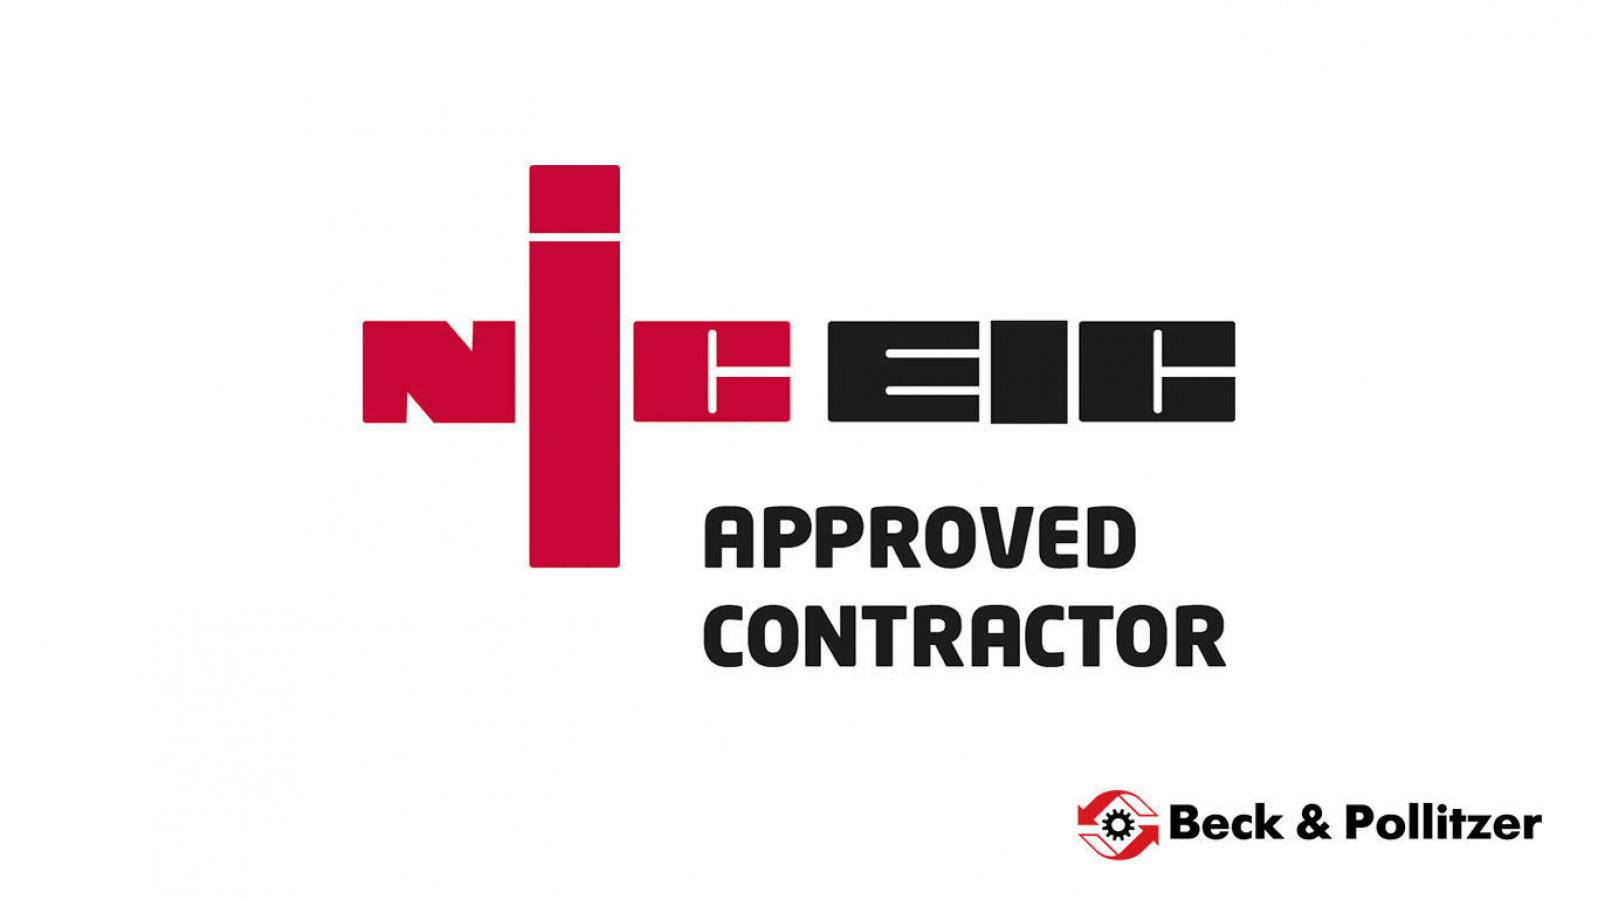 Beck & Pollitzer is now an NICEIC approved contrac...